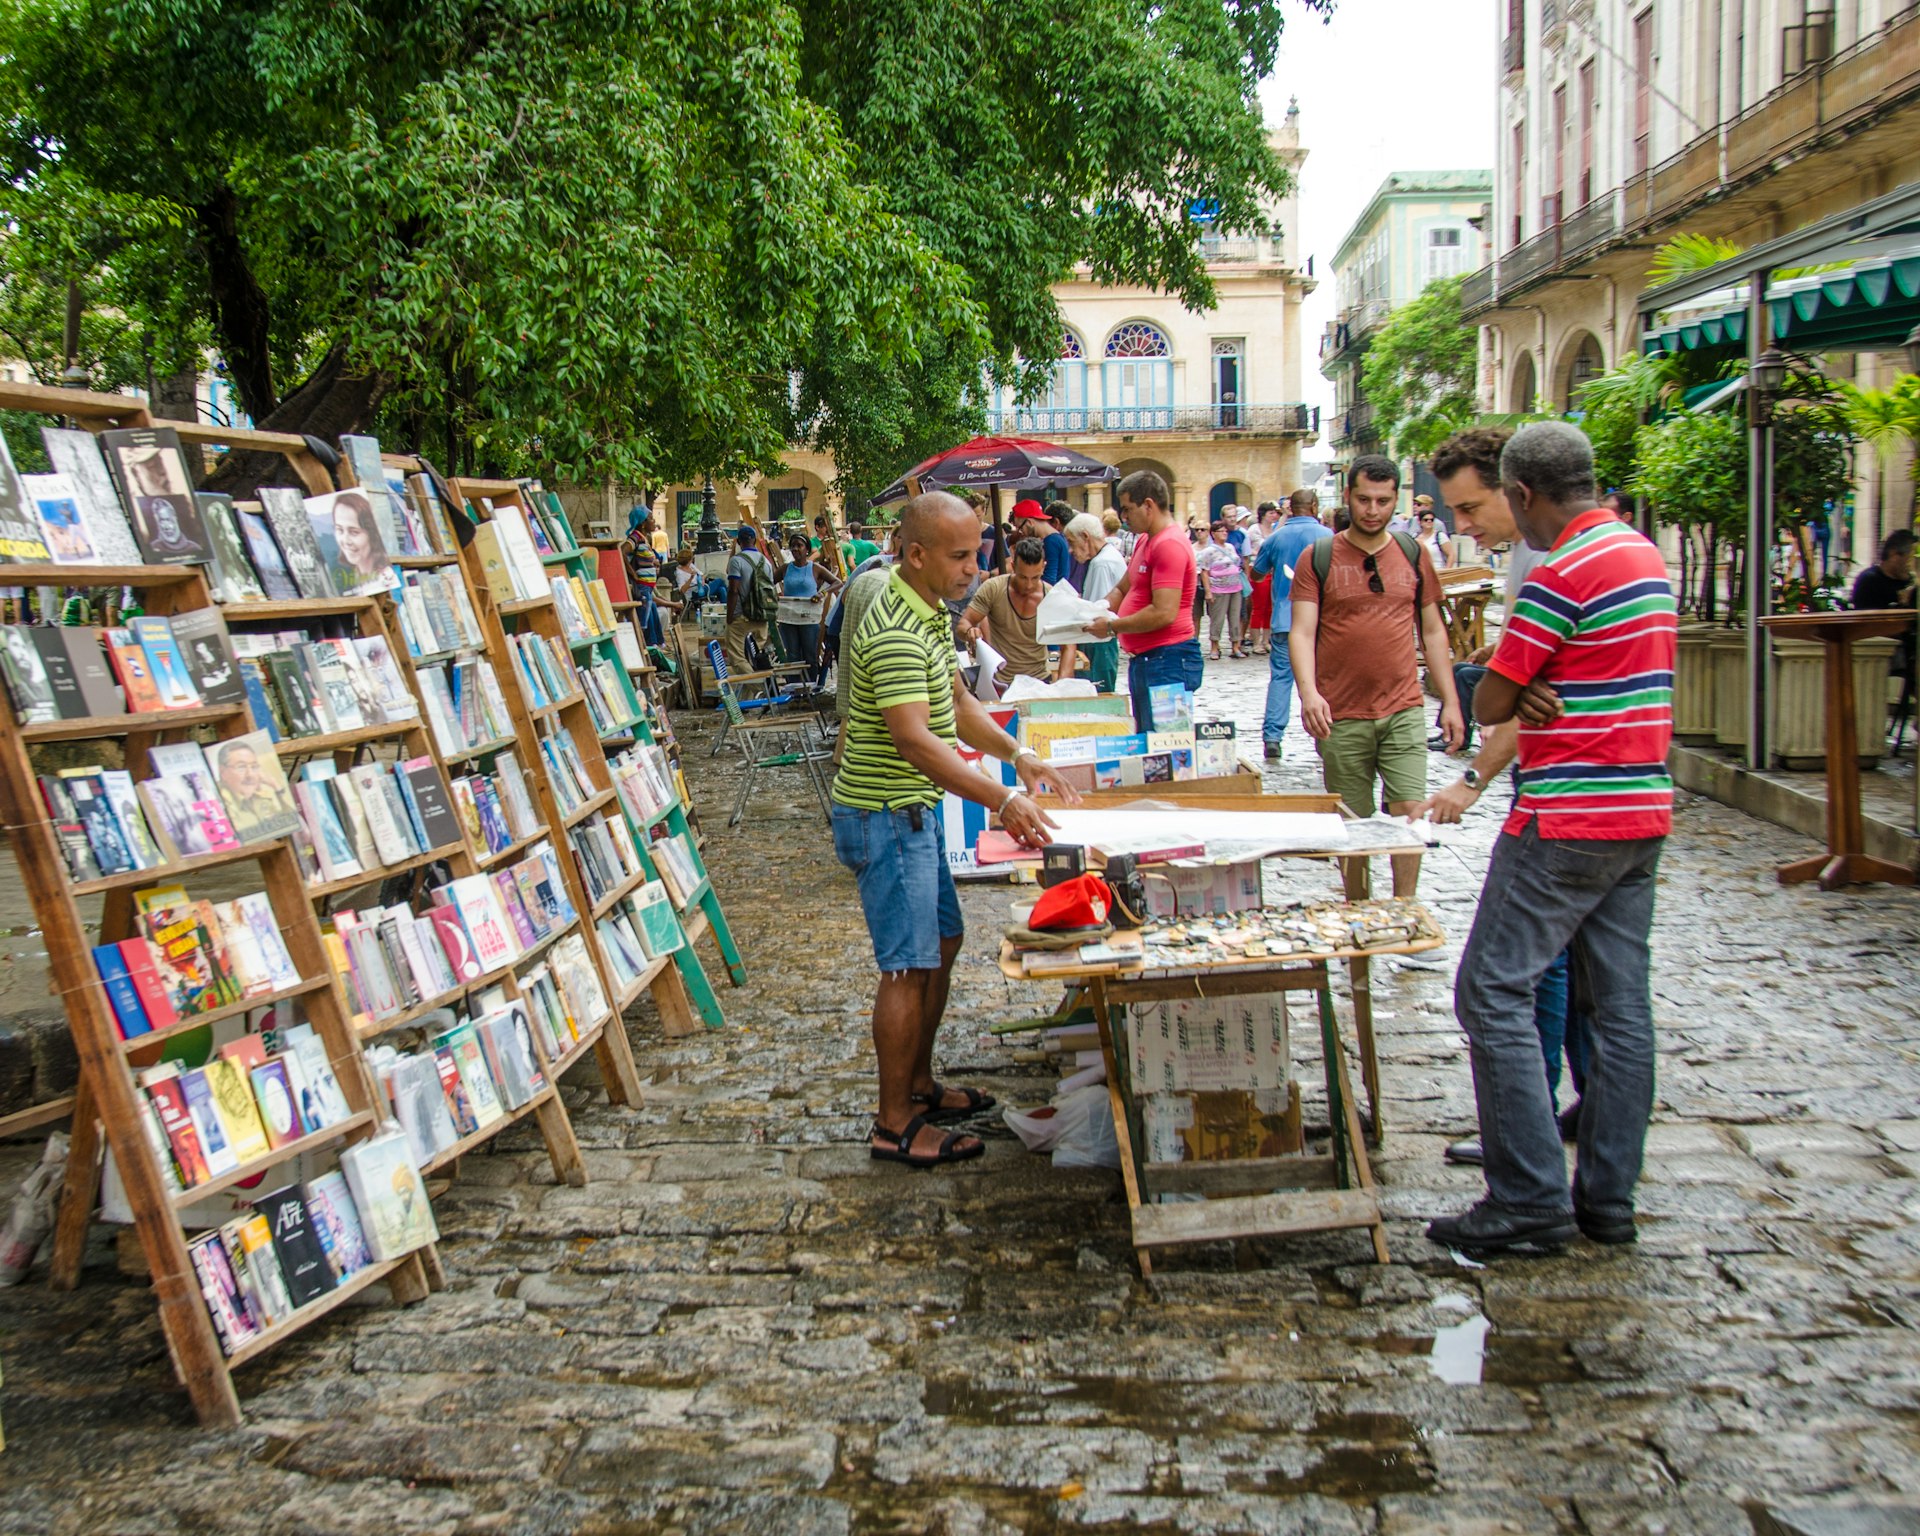 ourists examine a poster at one of the stalls at Plaza de Armas selling books, magazines, art and antiques.